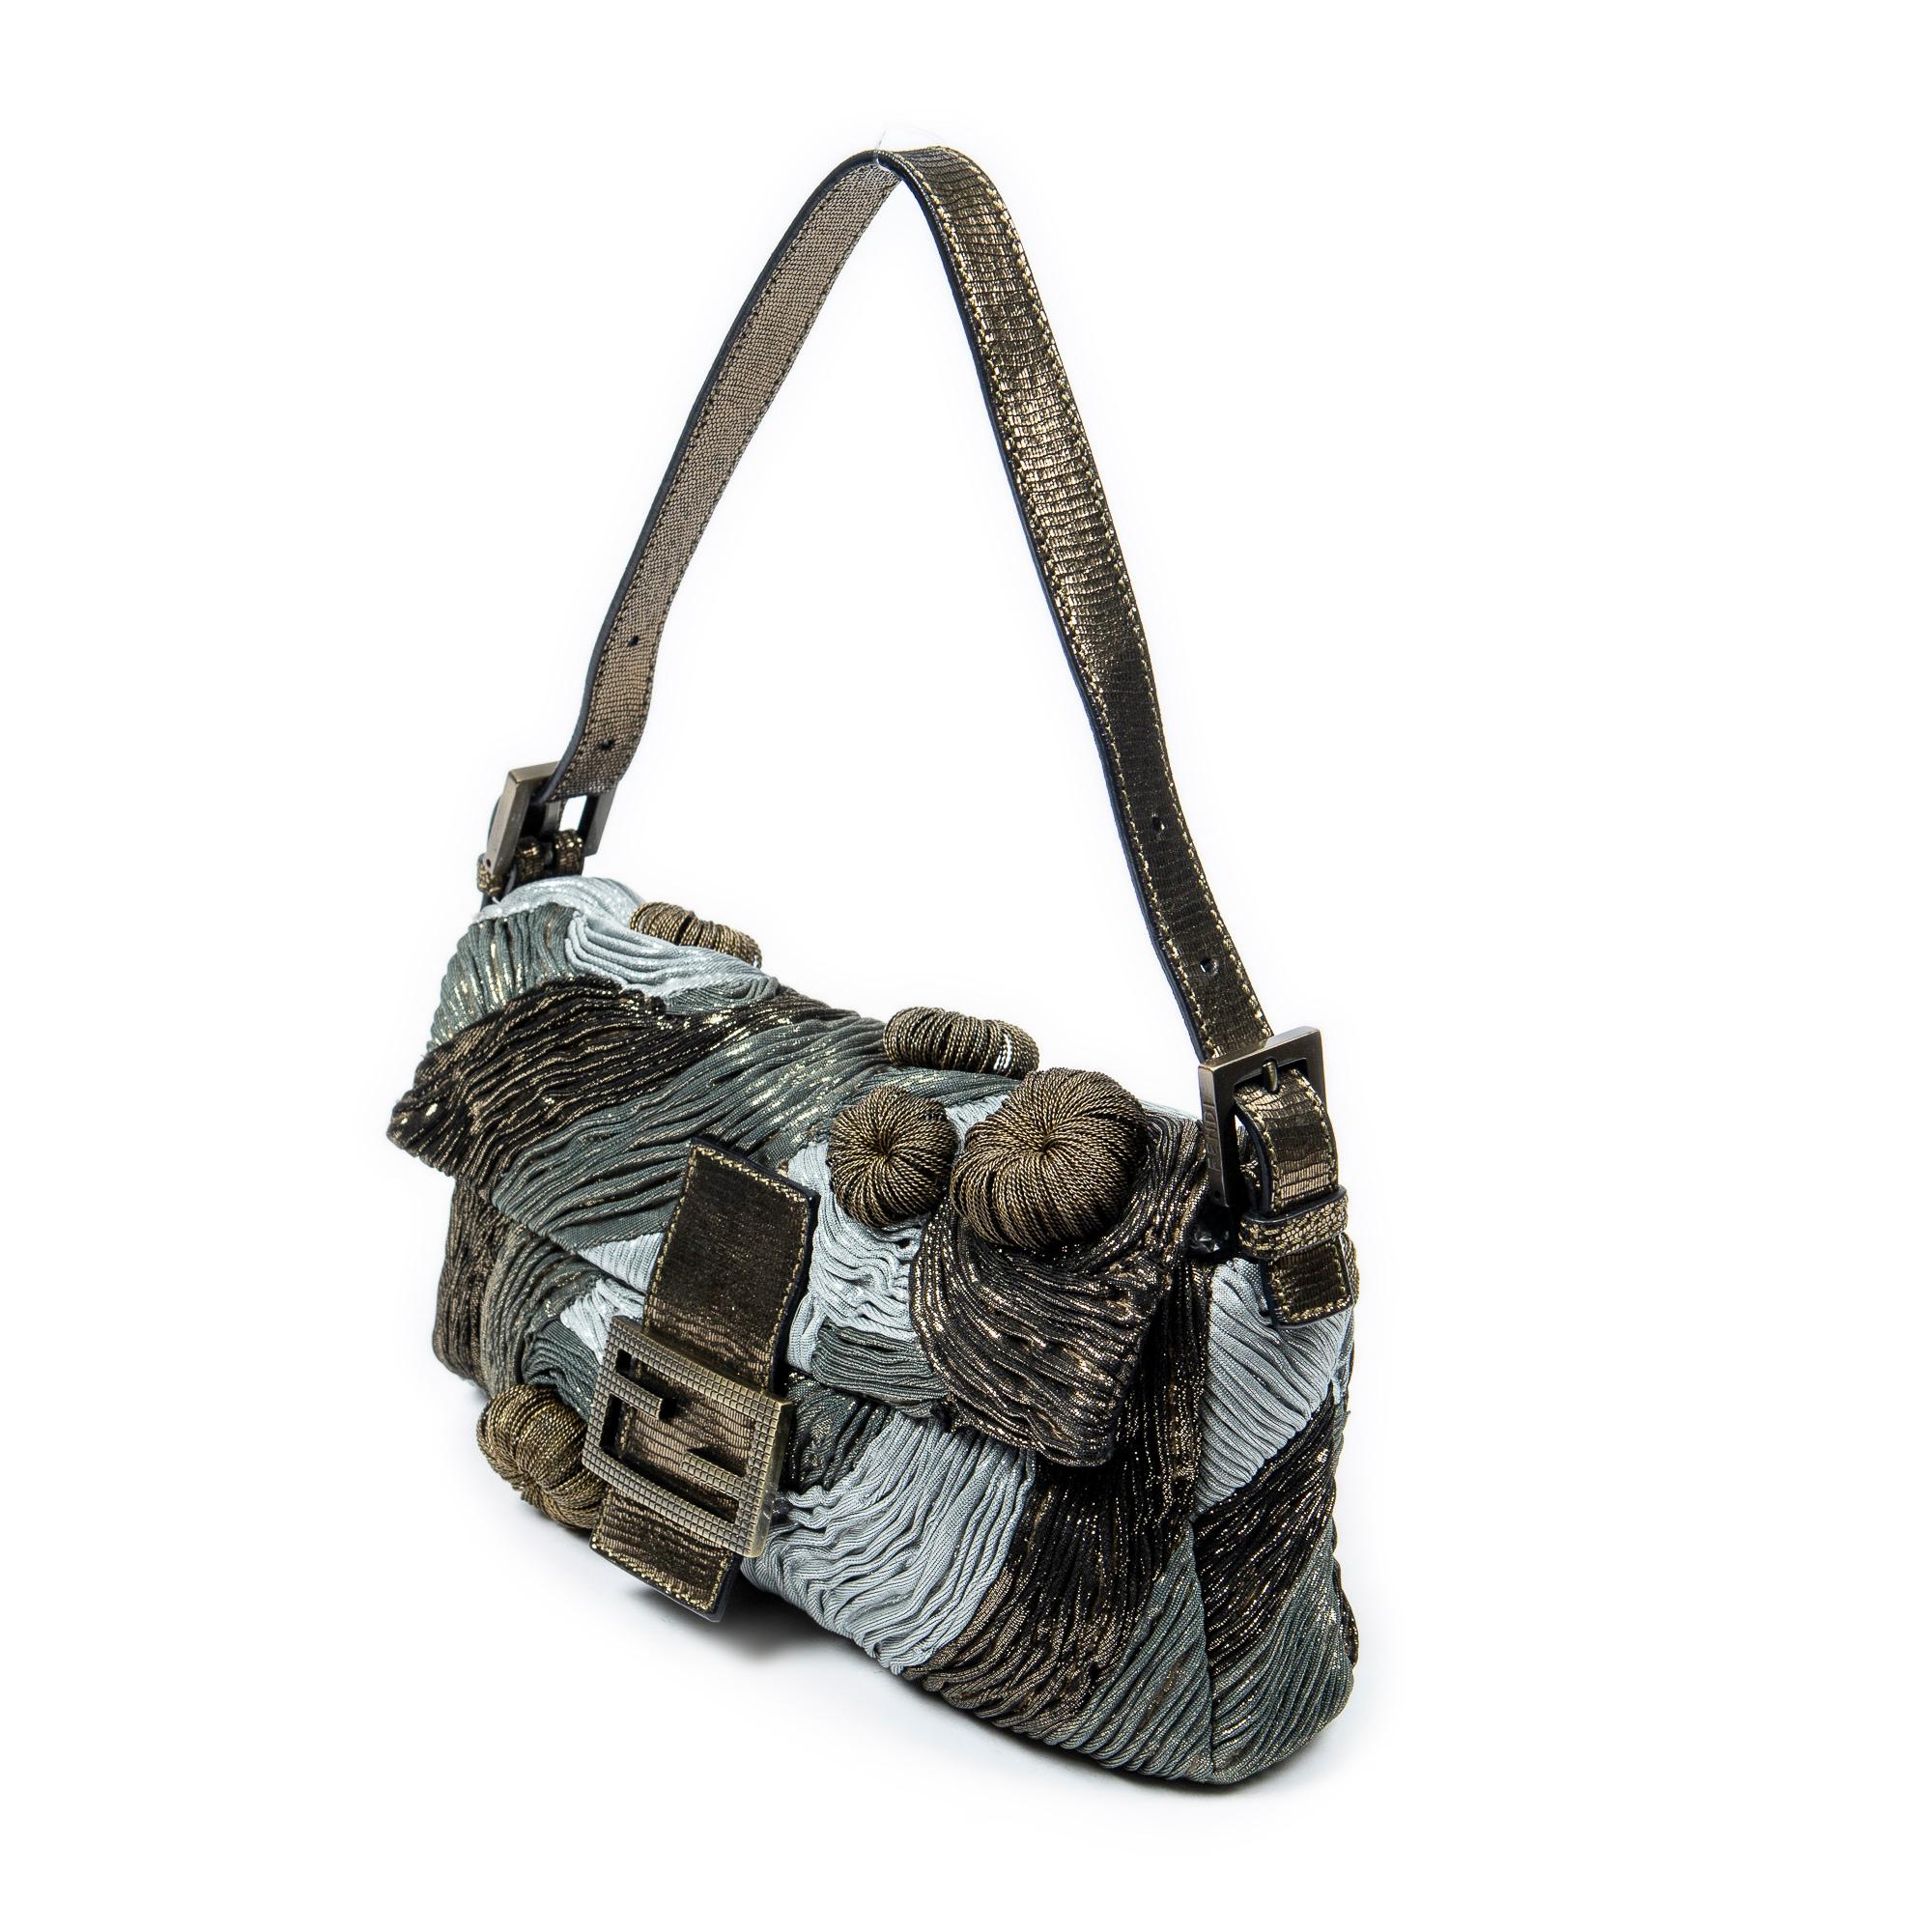 Embellish your style with the Olive/Blue/Green Ltd. Ed. Metallic Medusa Baguette, featuring a captivating olive/blue/green metallic-thread lined canvas. Its brushed gold hardware and satin closure radiate elegance while the interior zippered pocket